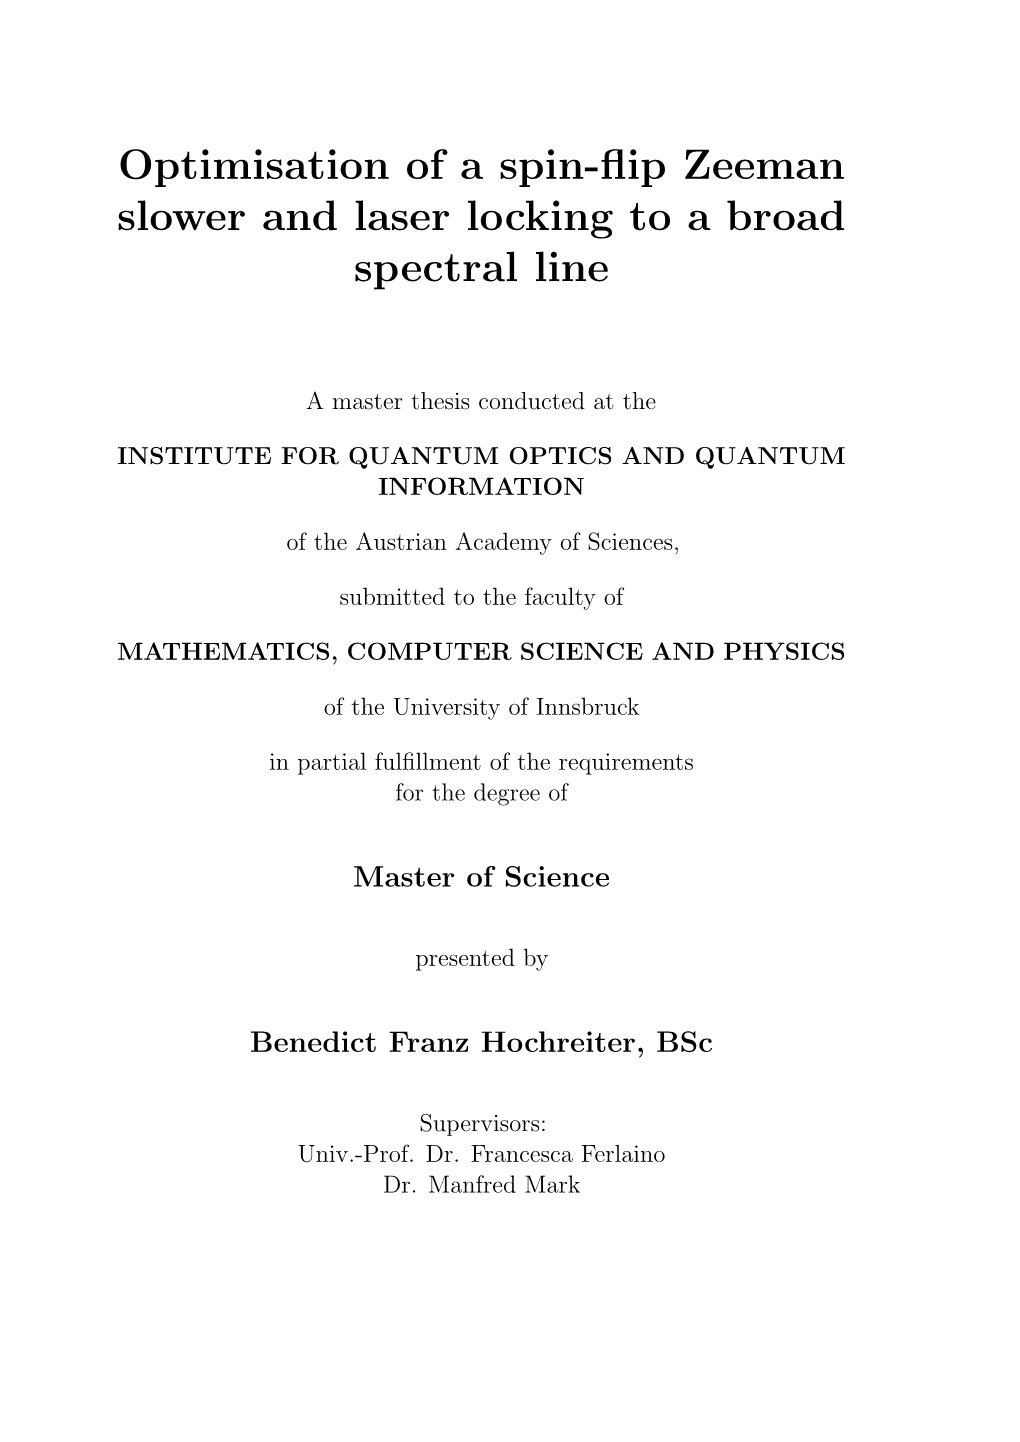 Optimisation of a Spin-Fip Zeeman Slower and Laser Locking to a Broad